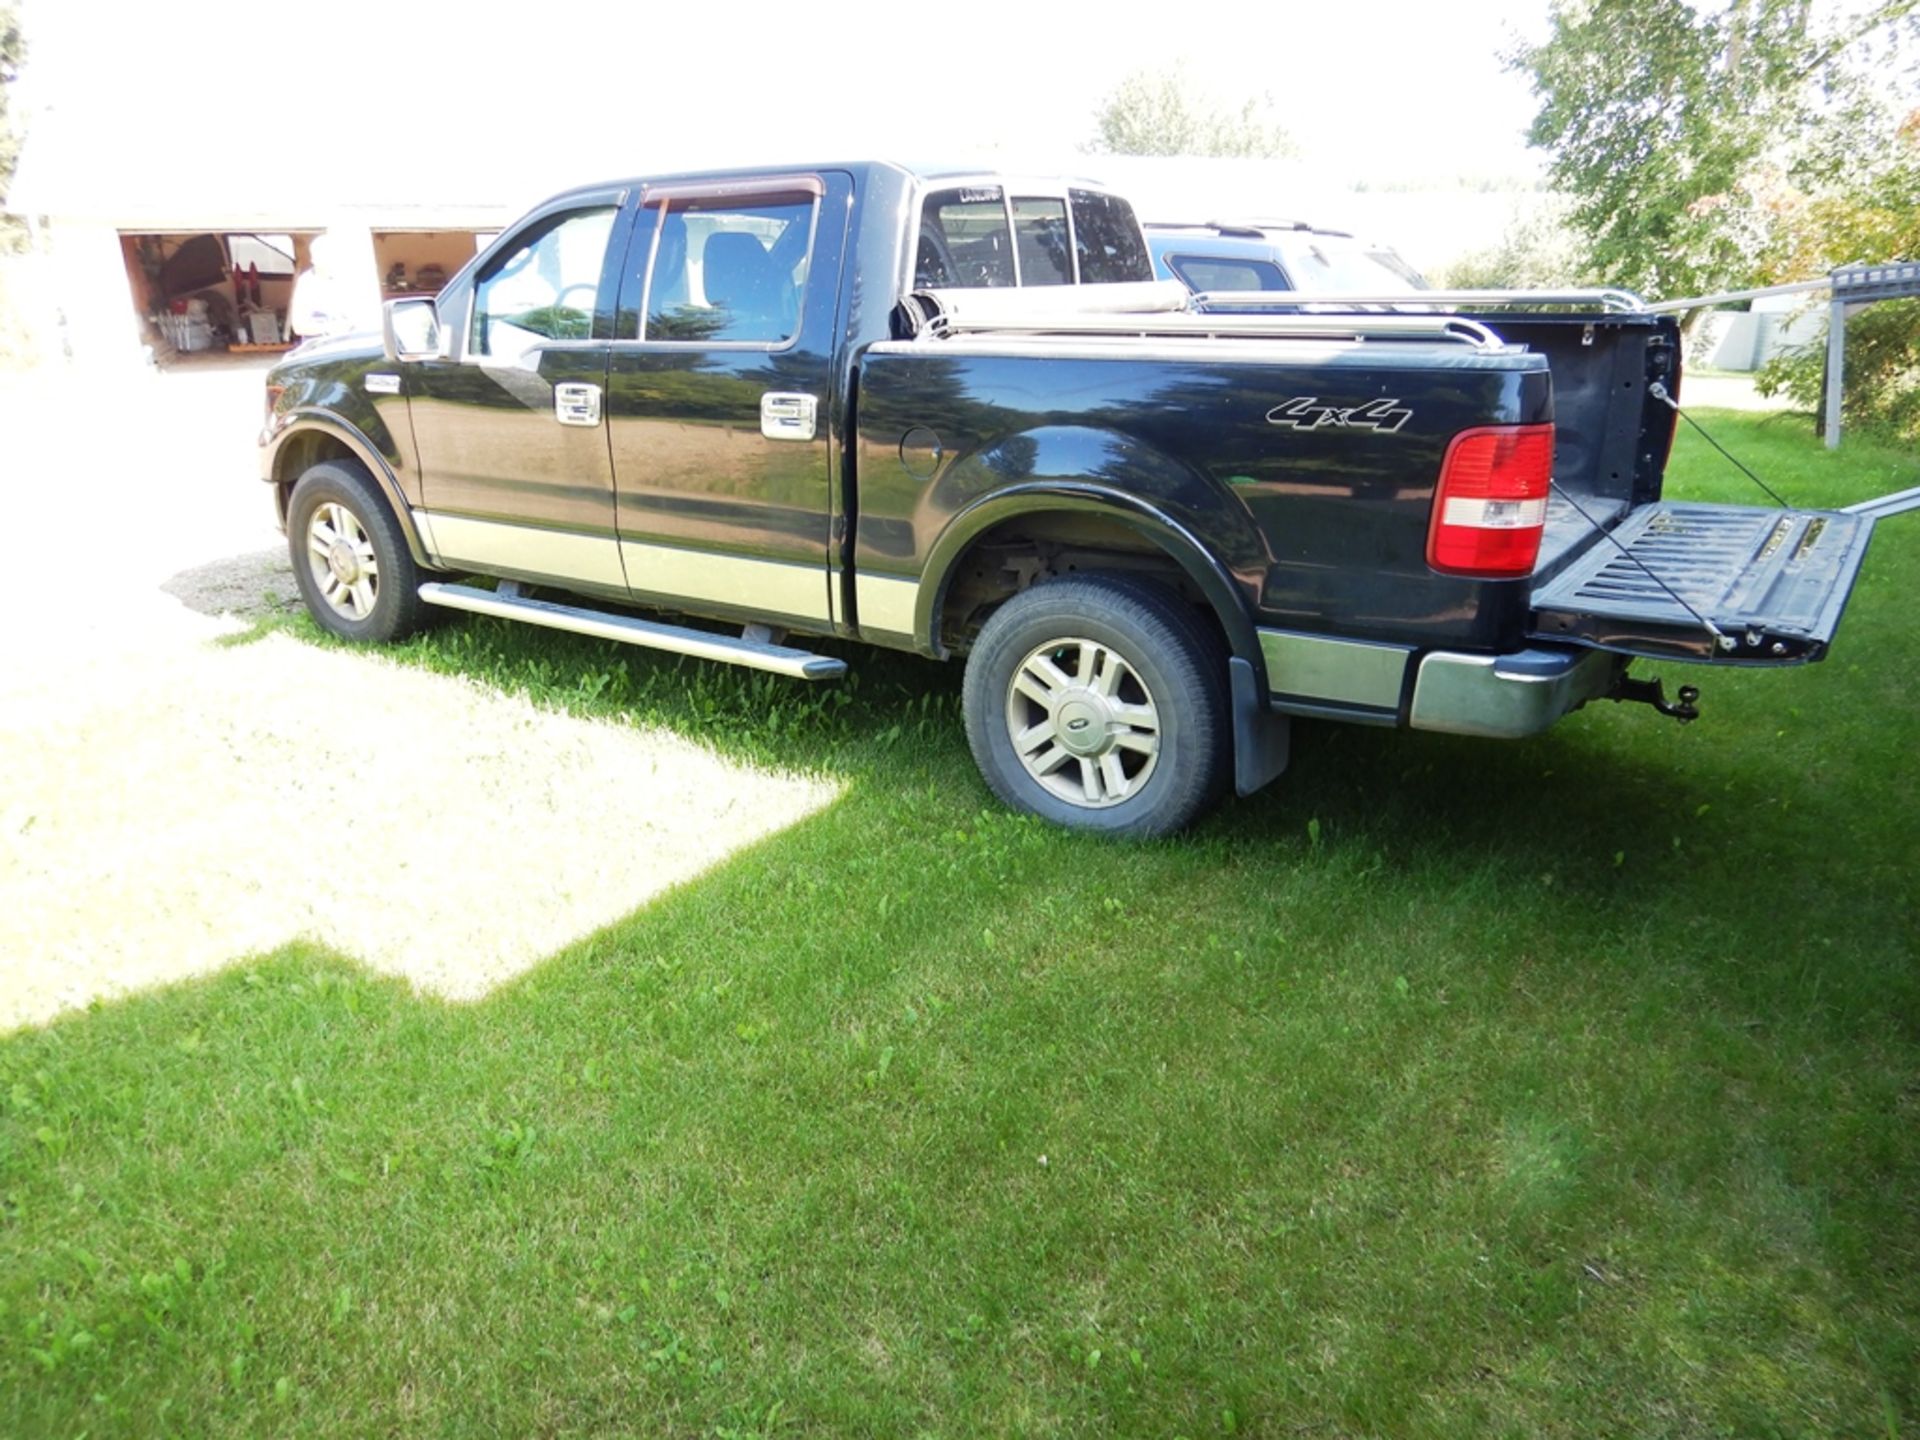 2004 Ford F150 XLT SUPER CREW SB 4WD TRUCK VIN: 1FTPW14504FA07719Engine: 5.4/330 V8A/T LEATHER W/ - Image 3 of 3